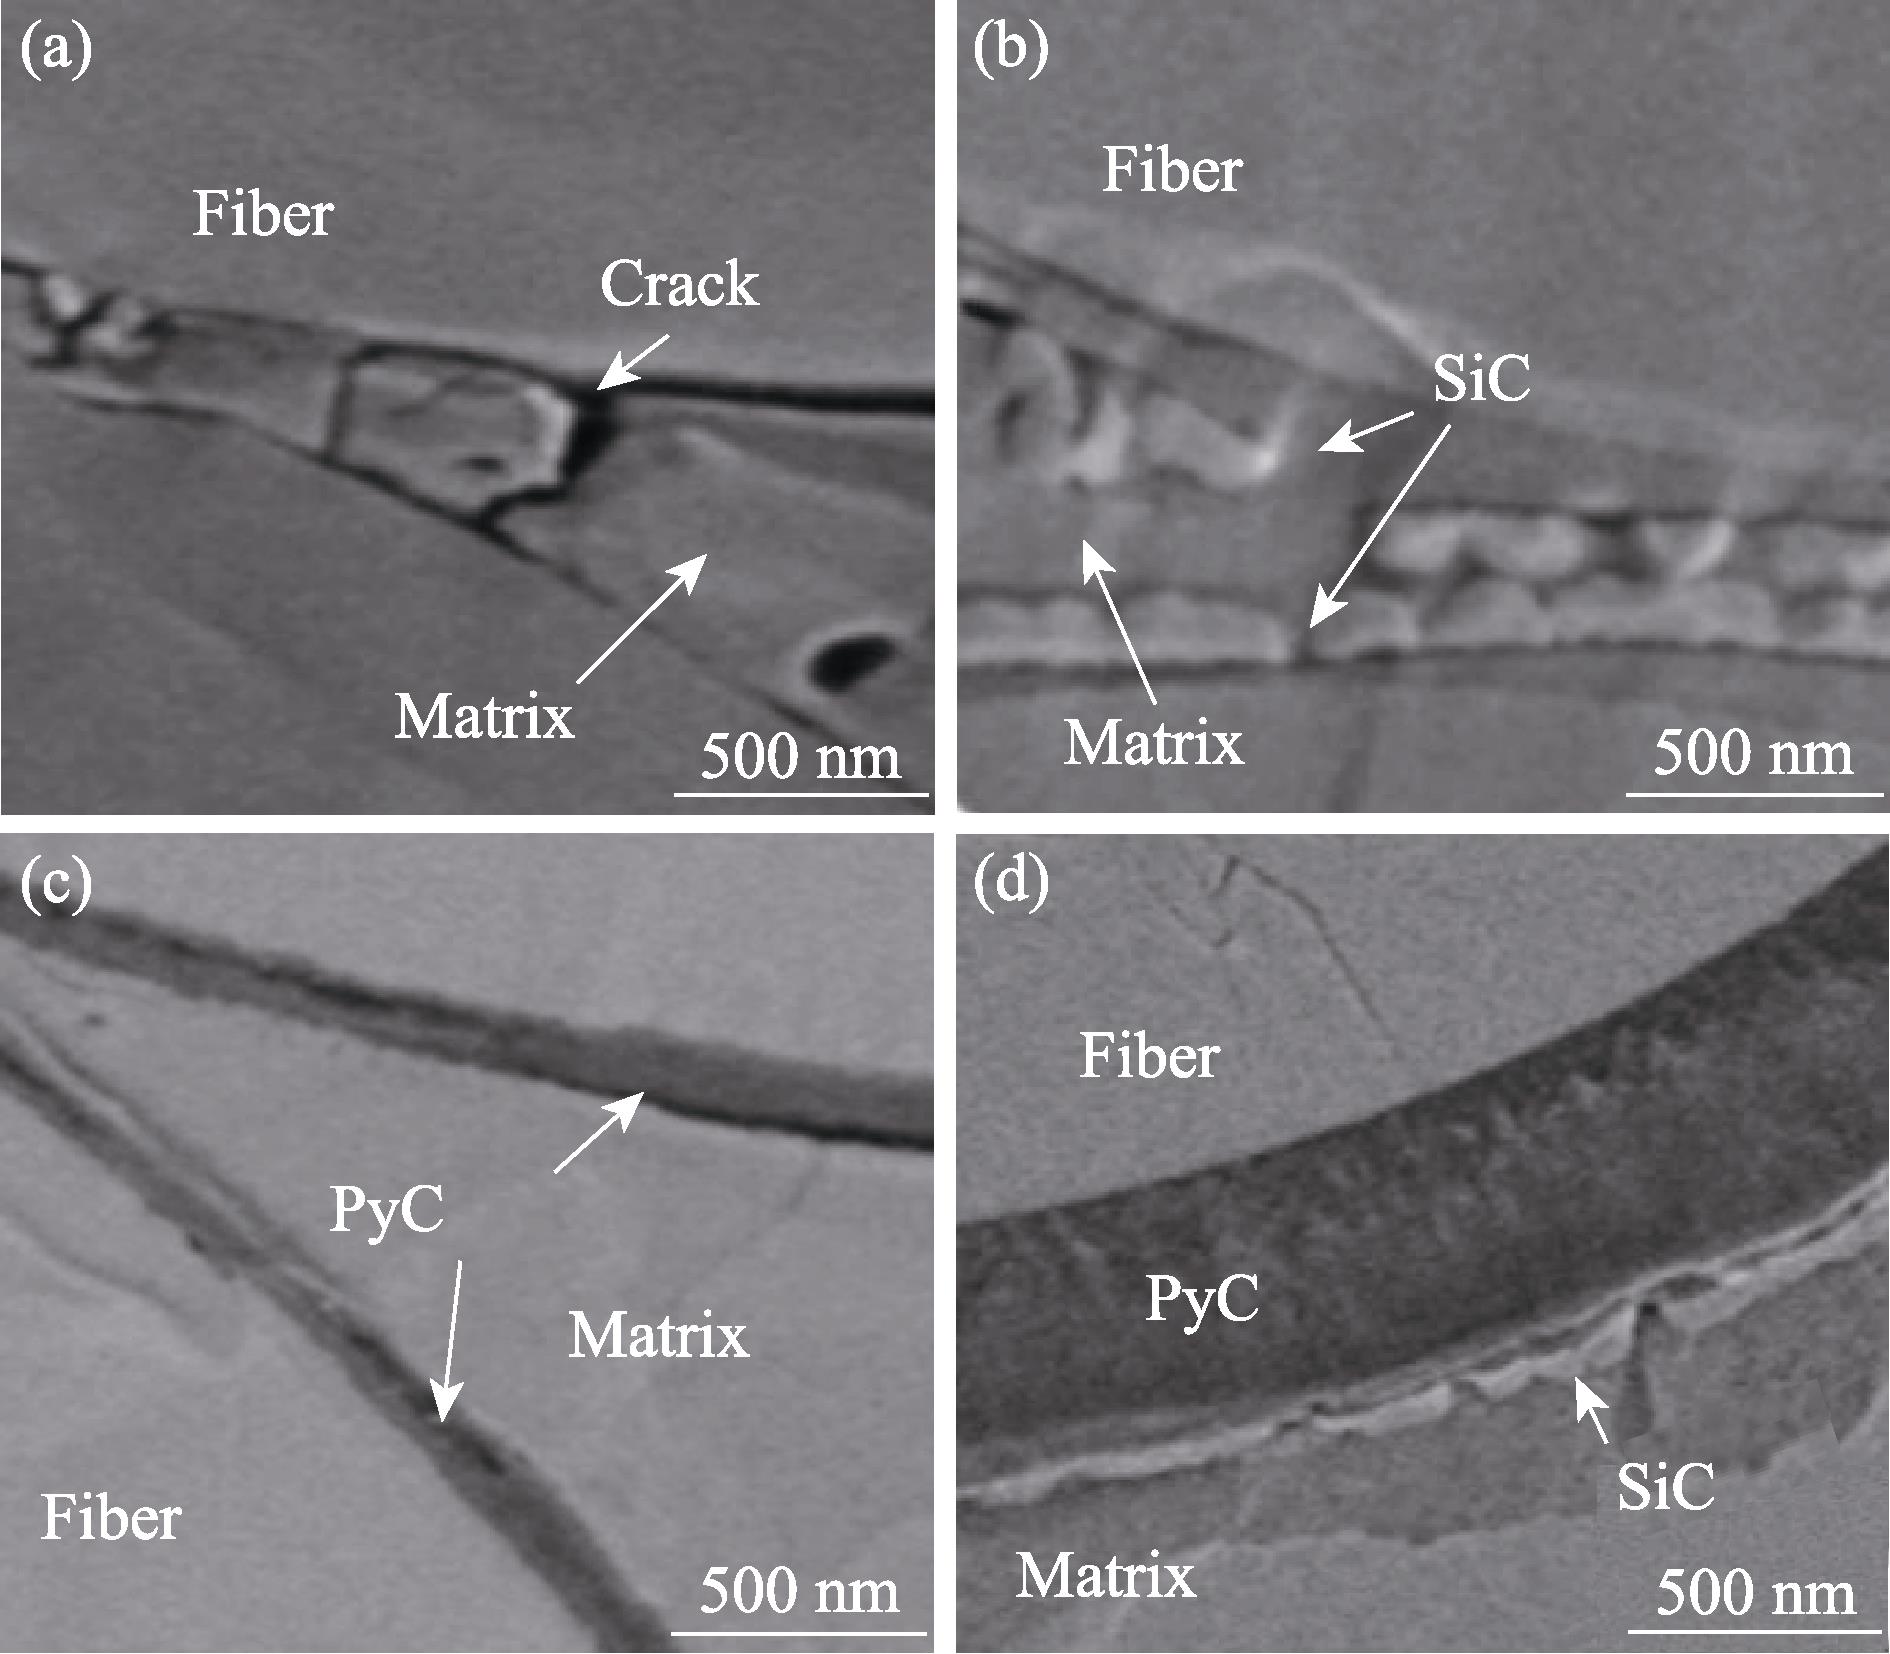 Cross-sectional SEM images of the composites with different interface layers